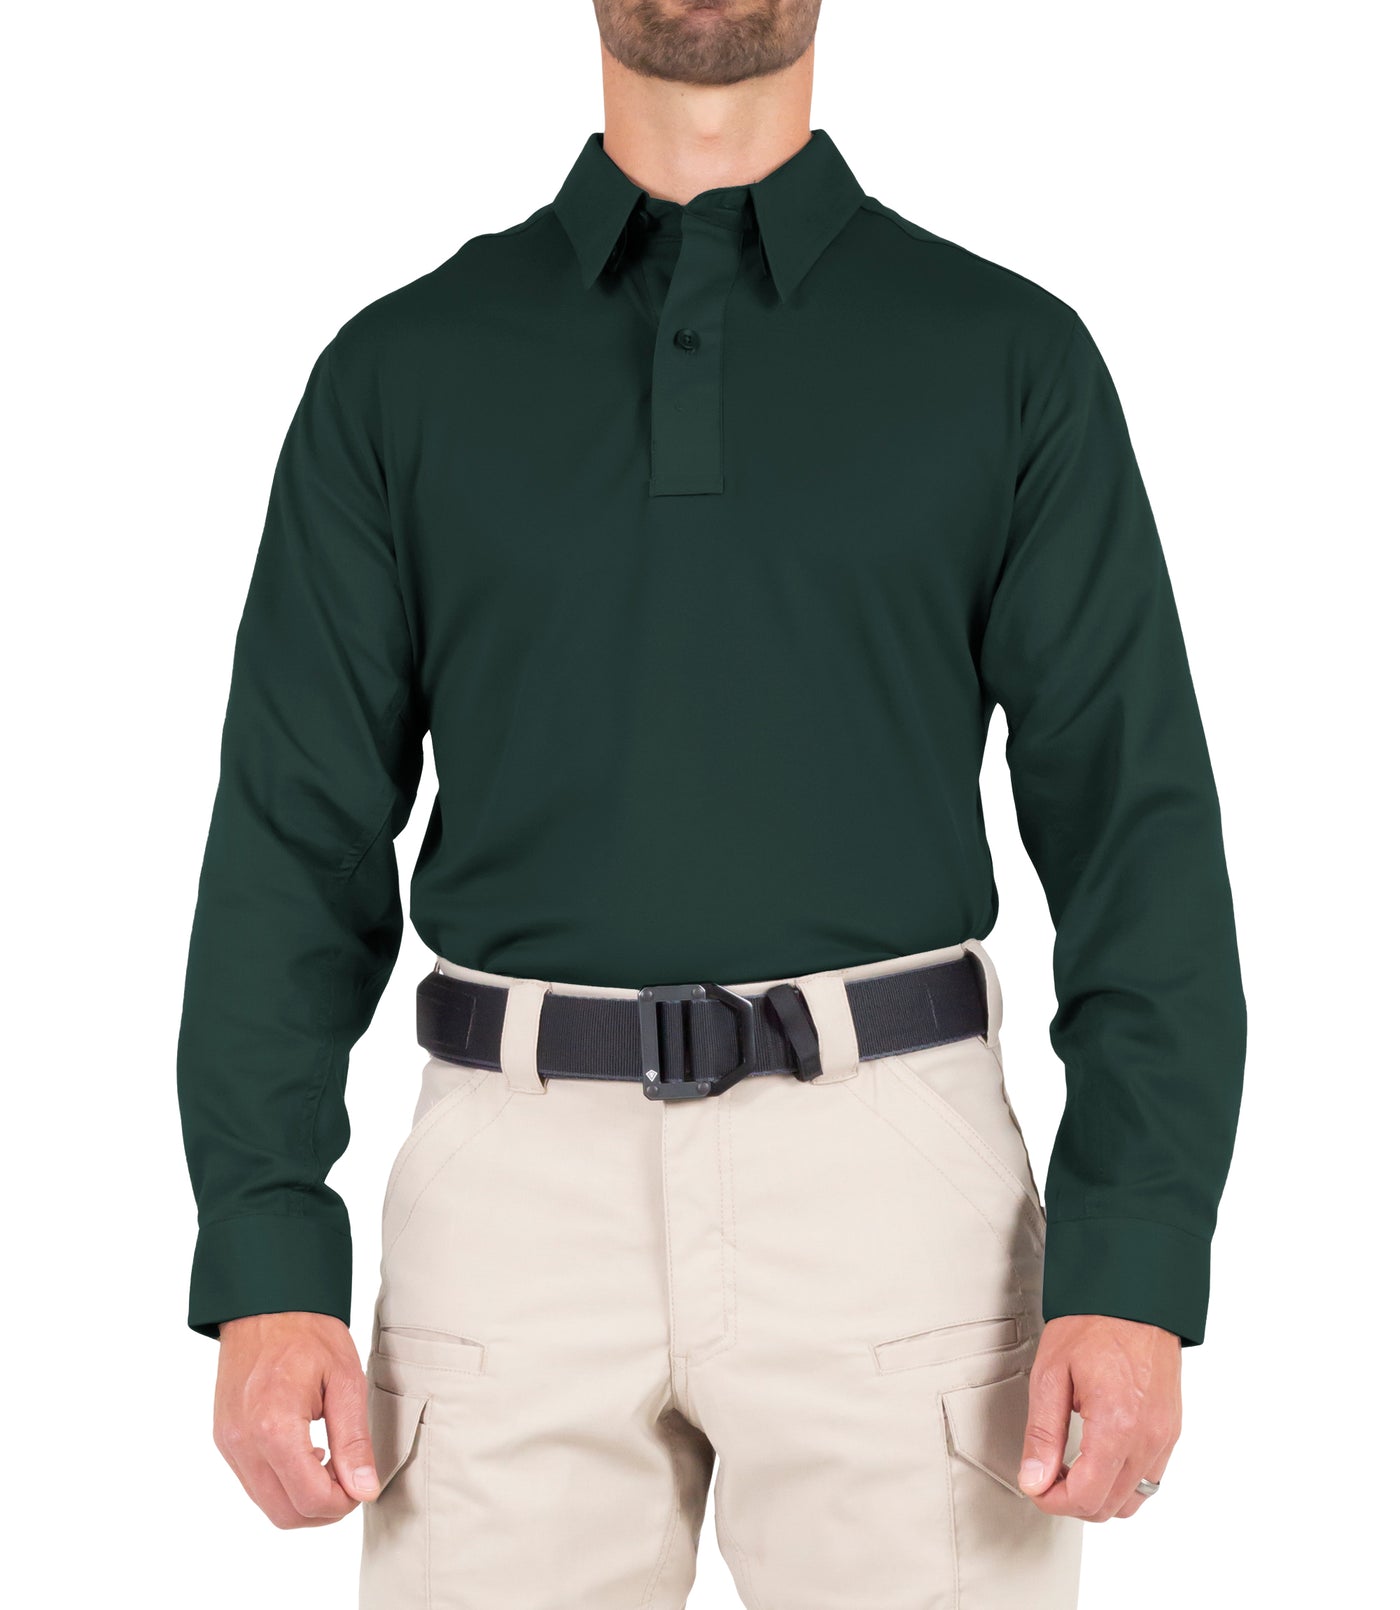 Front of Men's V2 Pro Performance Shirt in Spruce Green